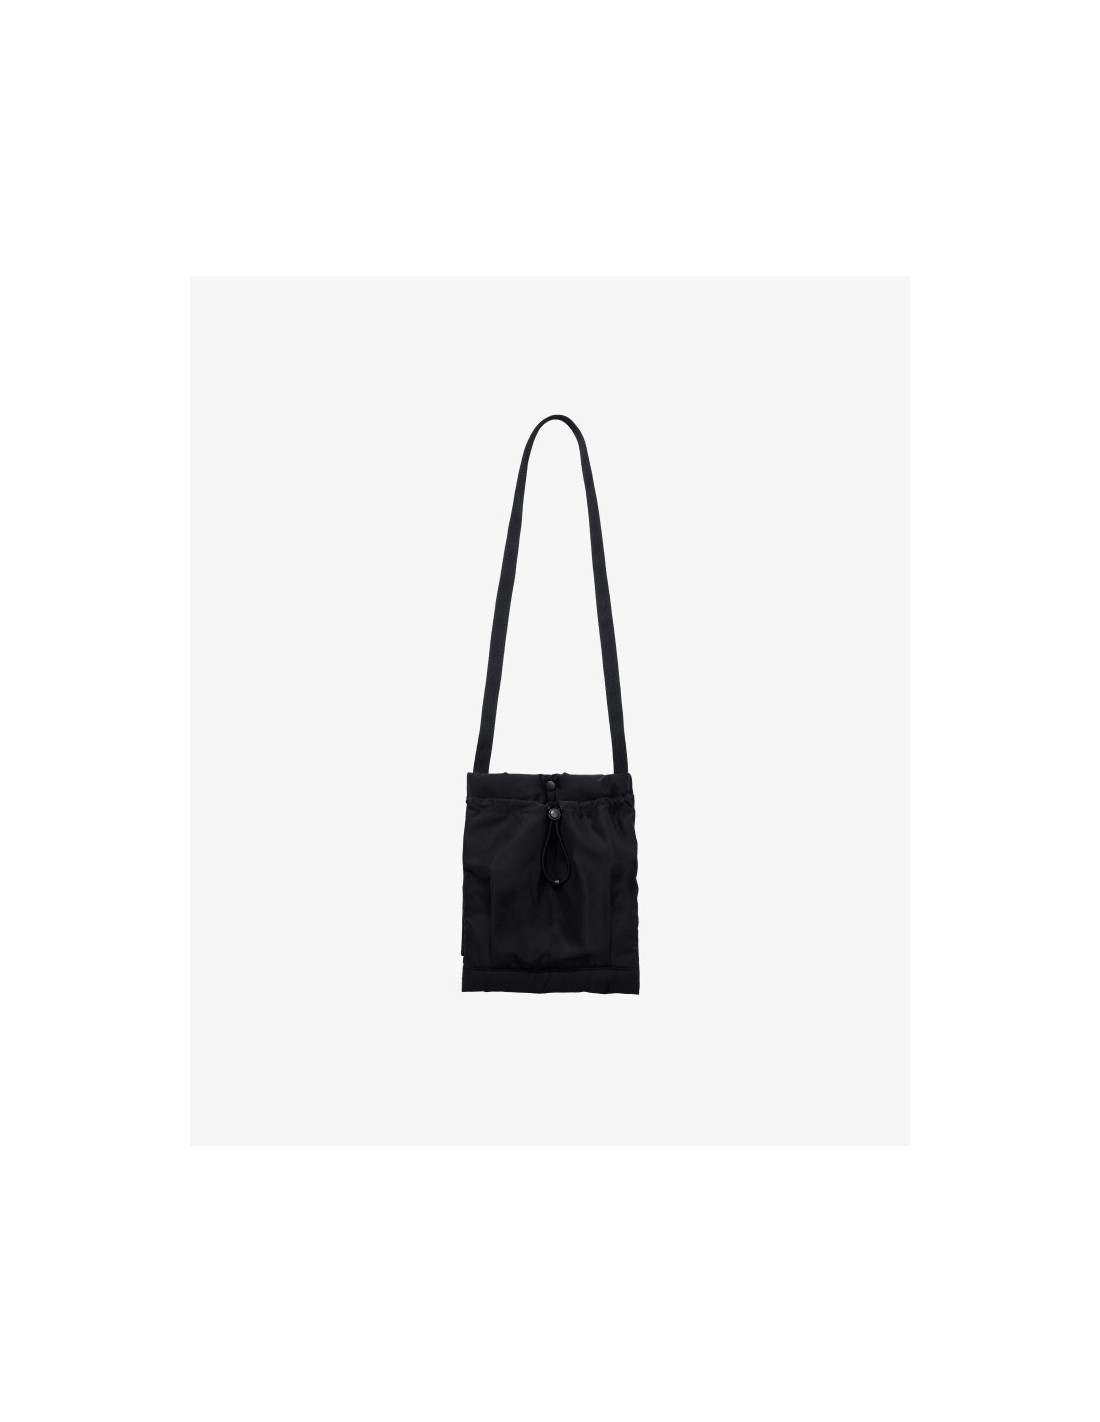 Fate Stay Night #5 Weekender Tote Bag by Isaac Martin - Pixels